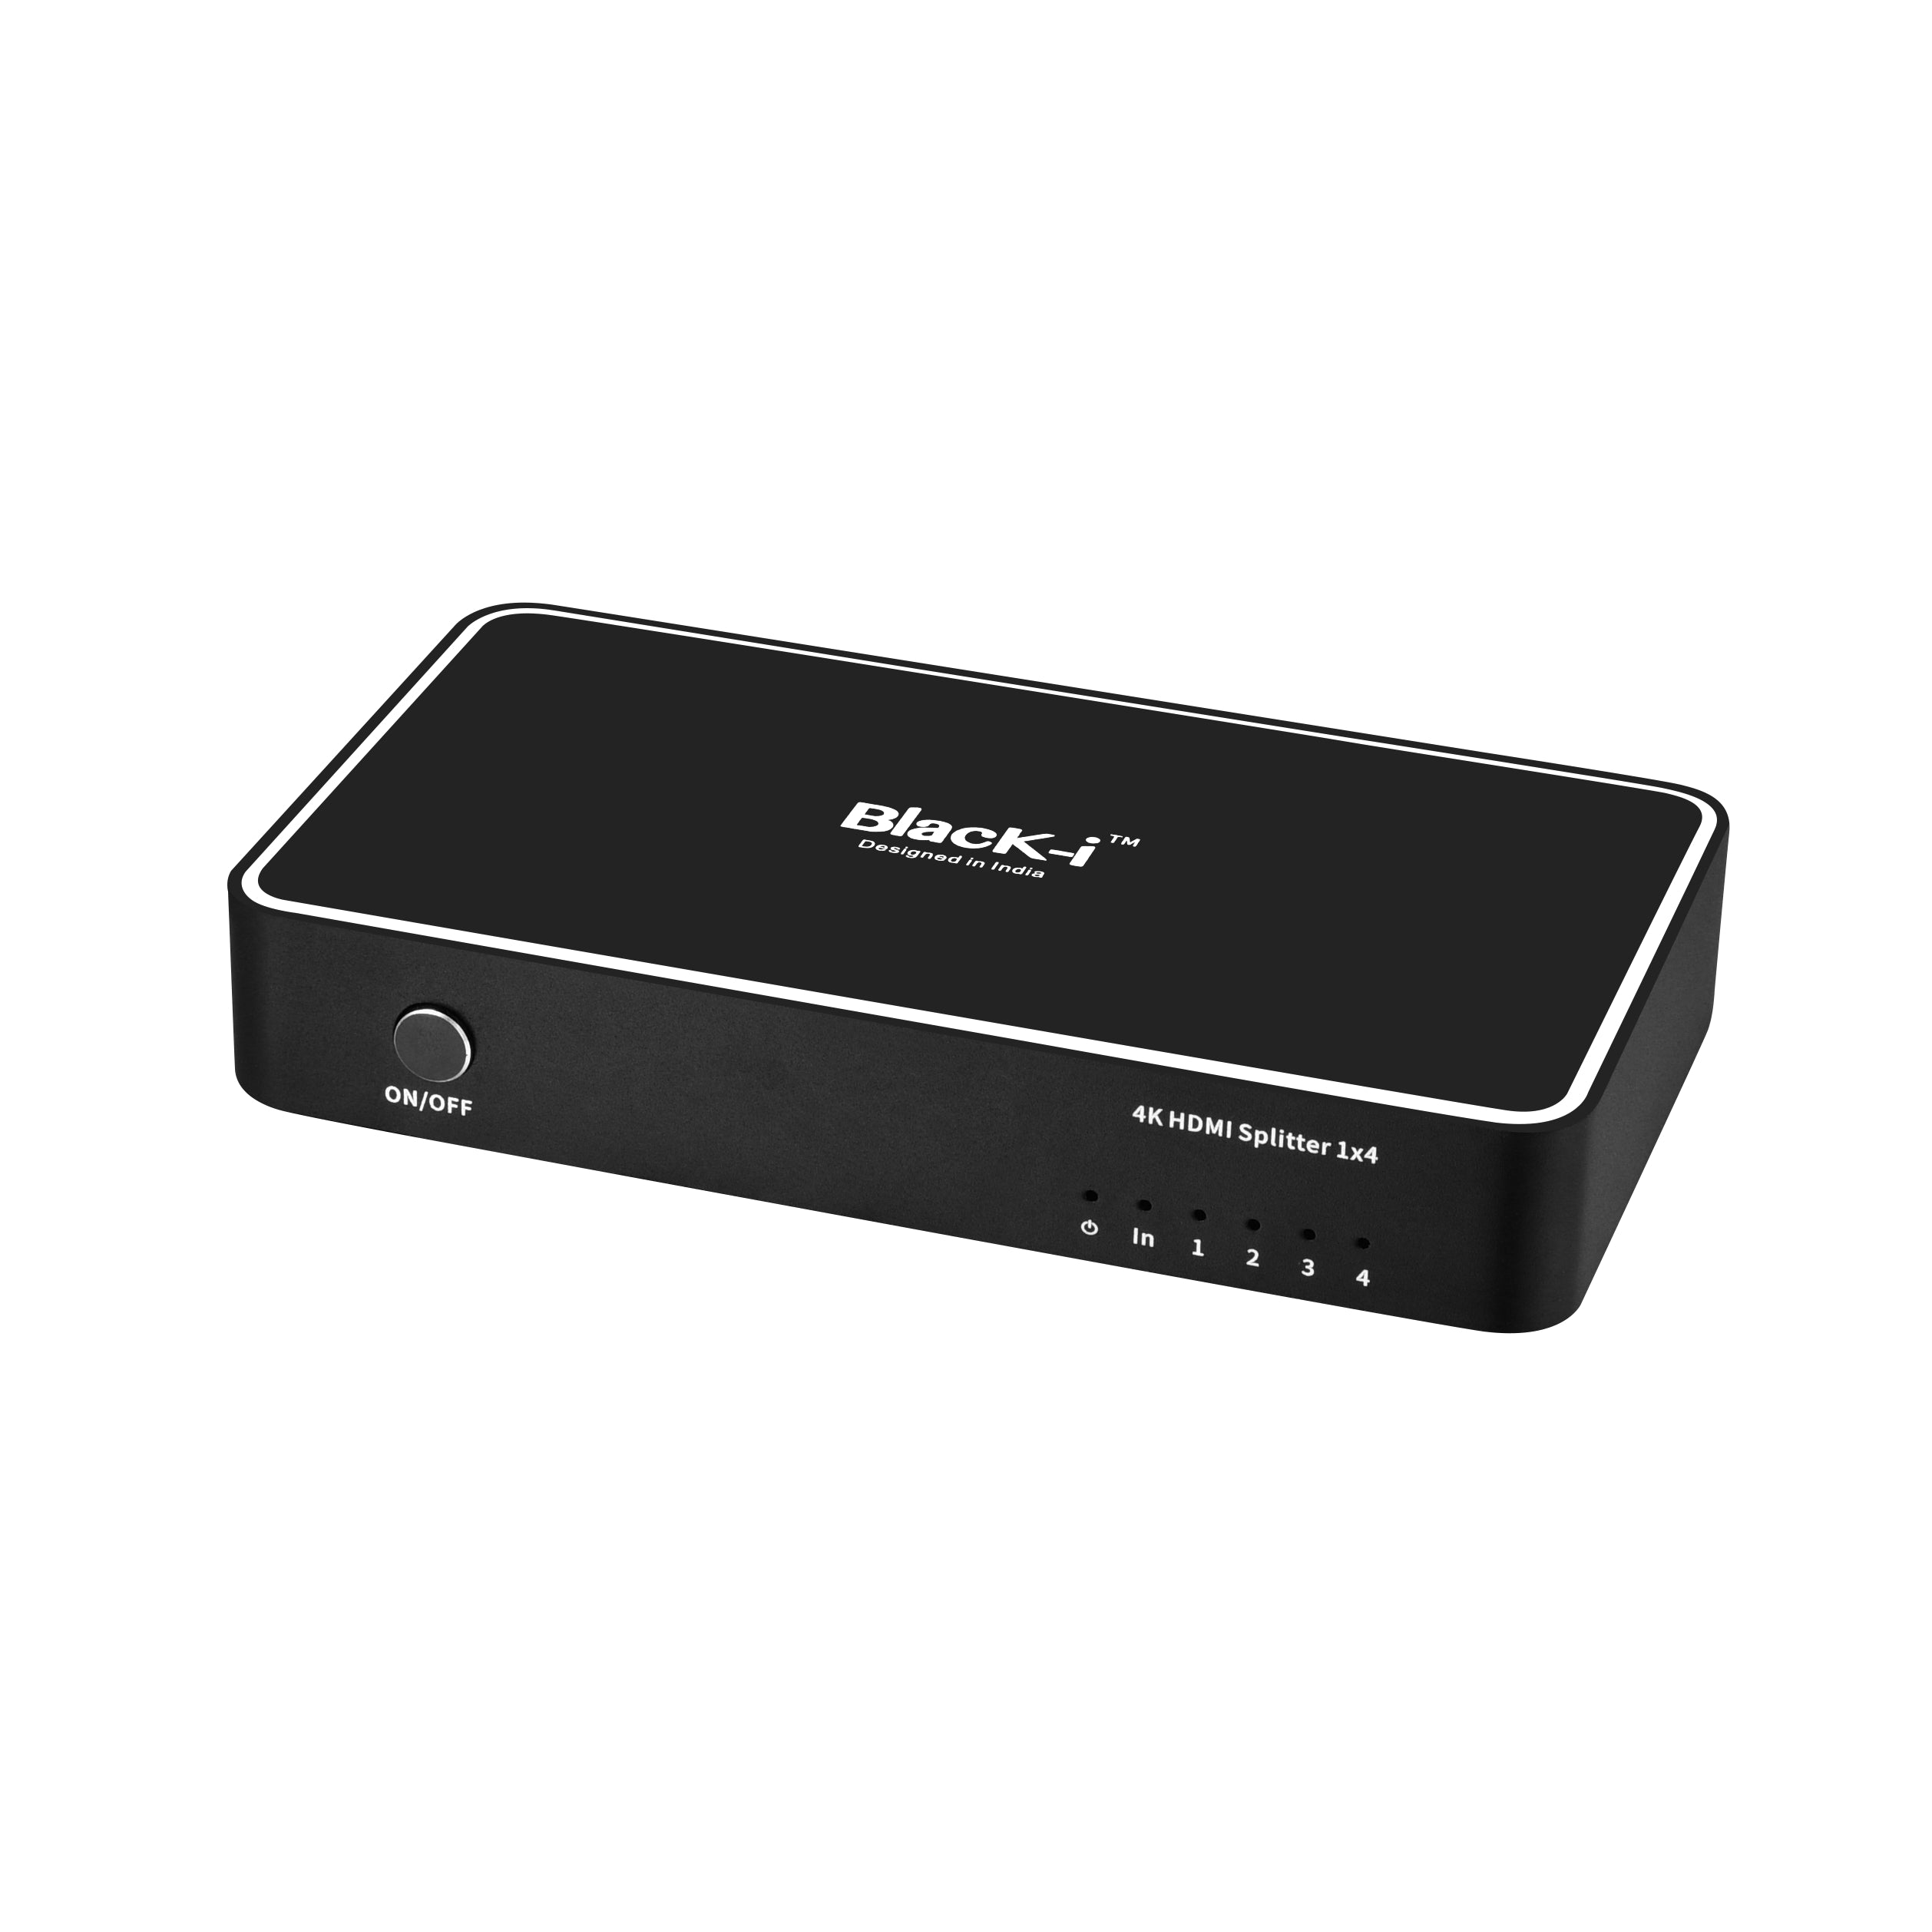 Black-i HDMI Splitter - 1 Input 4 Output – Seamless Signal Distribution for Expanded Multimedia Display